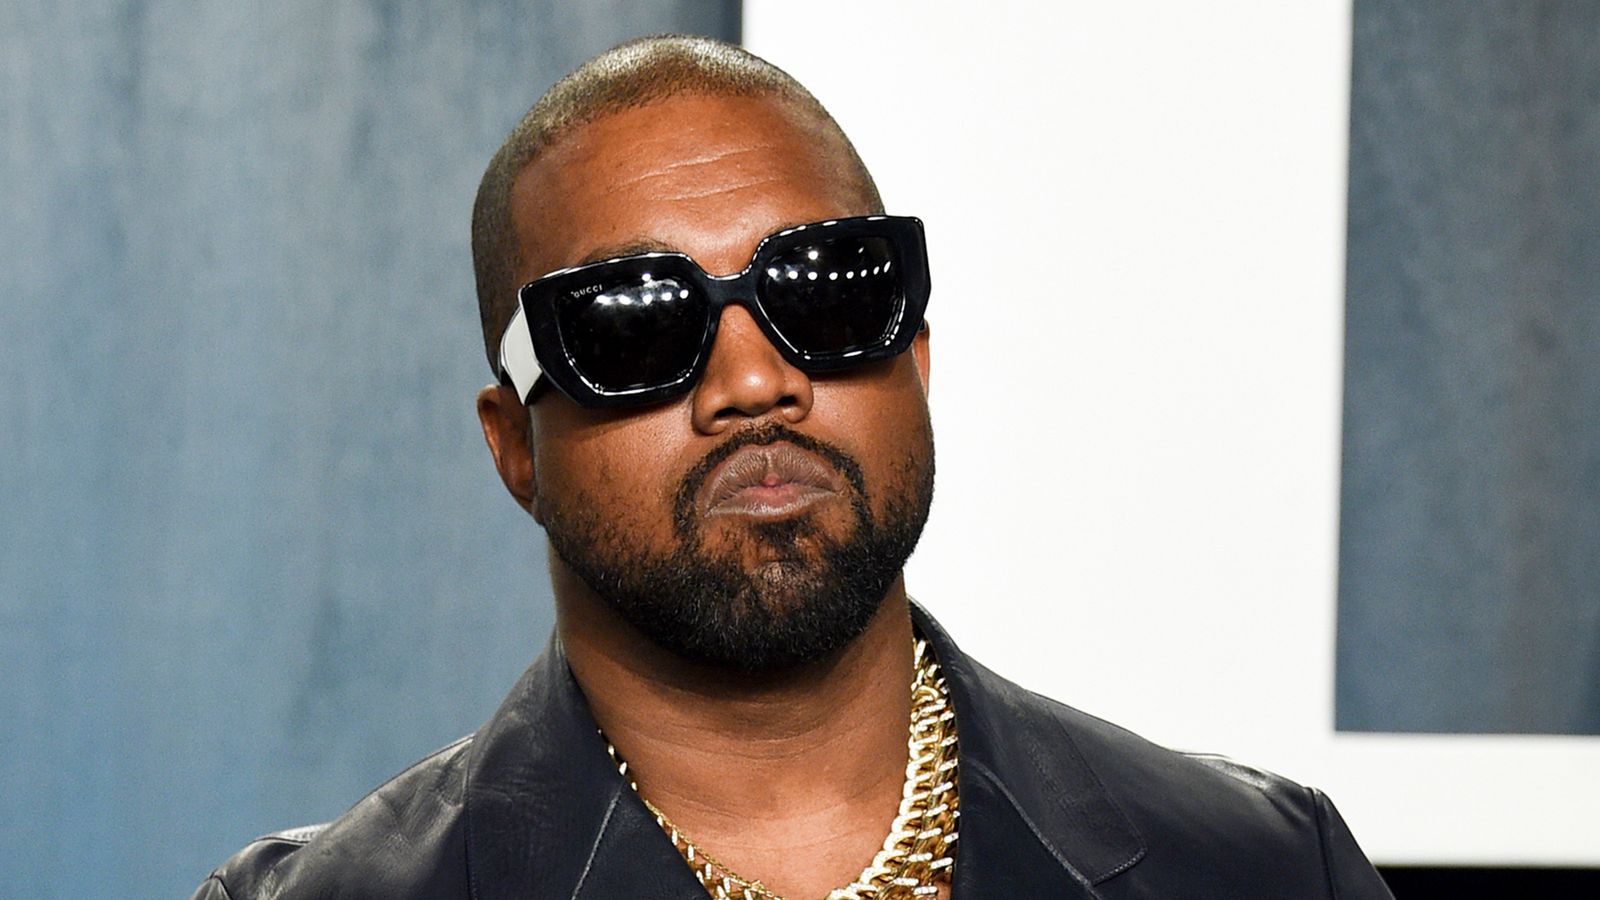 Adidas reveals when it will sell leftover Yeezy shoes from defunct Kanye West partnership